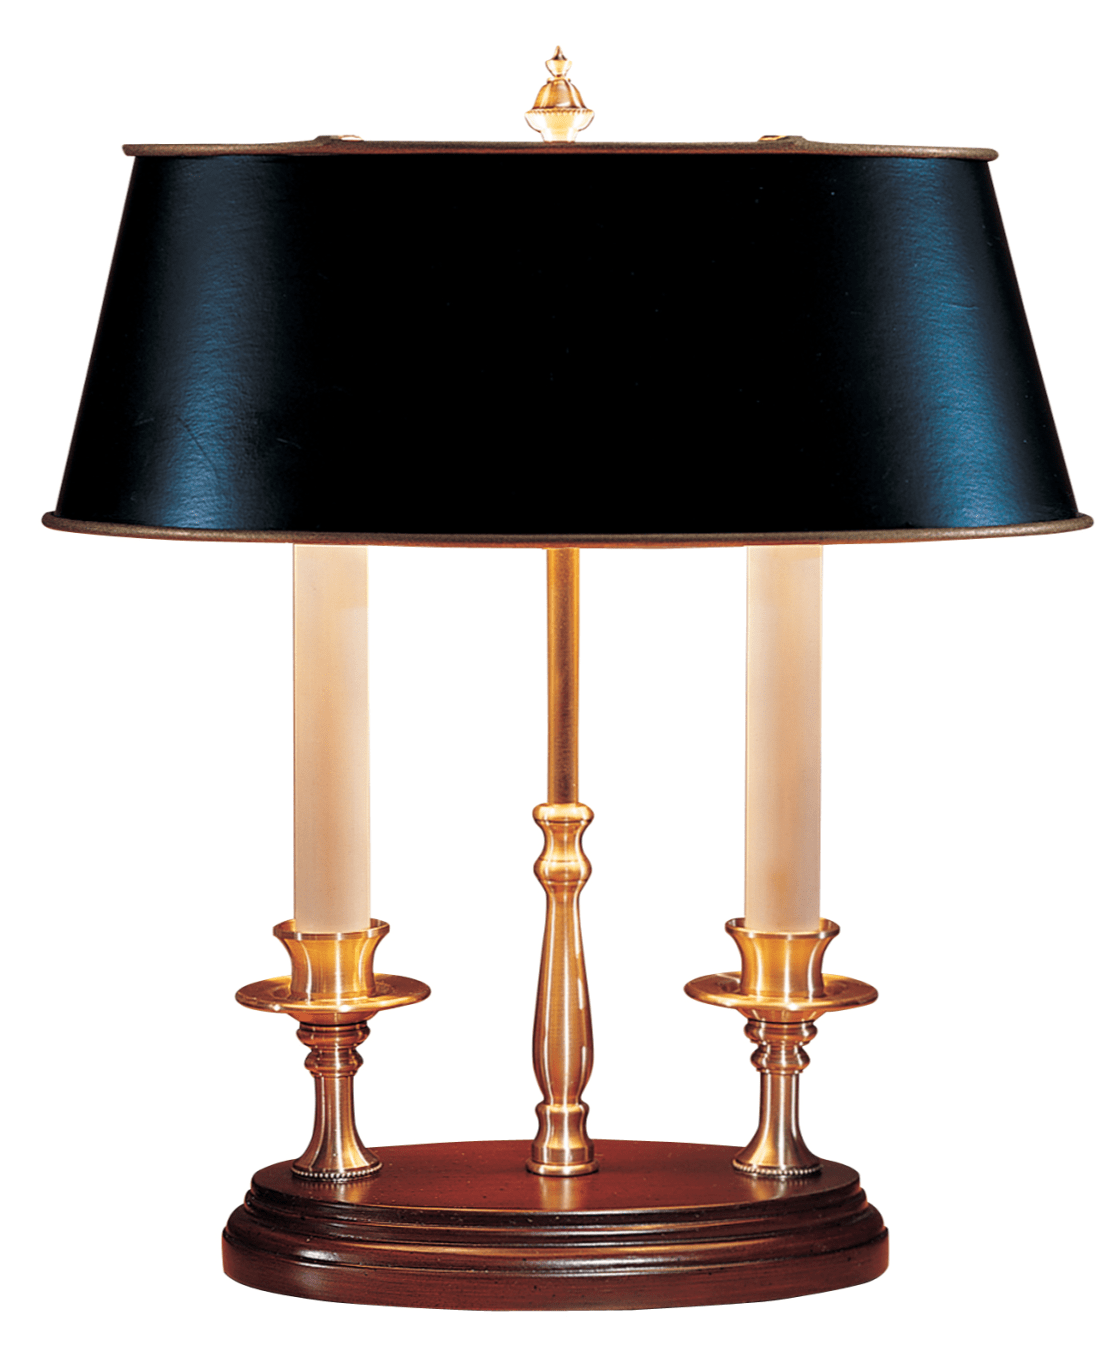 Twin Candle Brass Desk Lamp By Wildwood Lamps15 